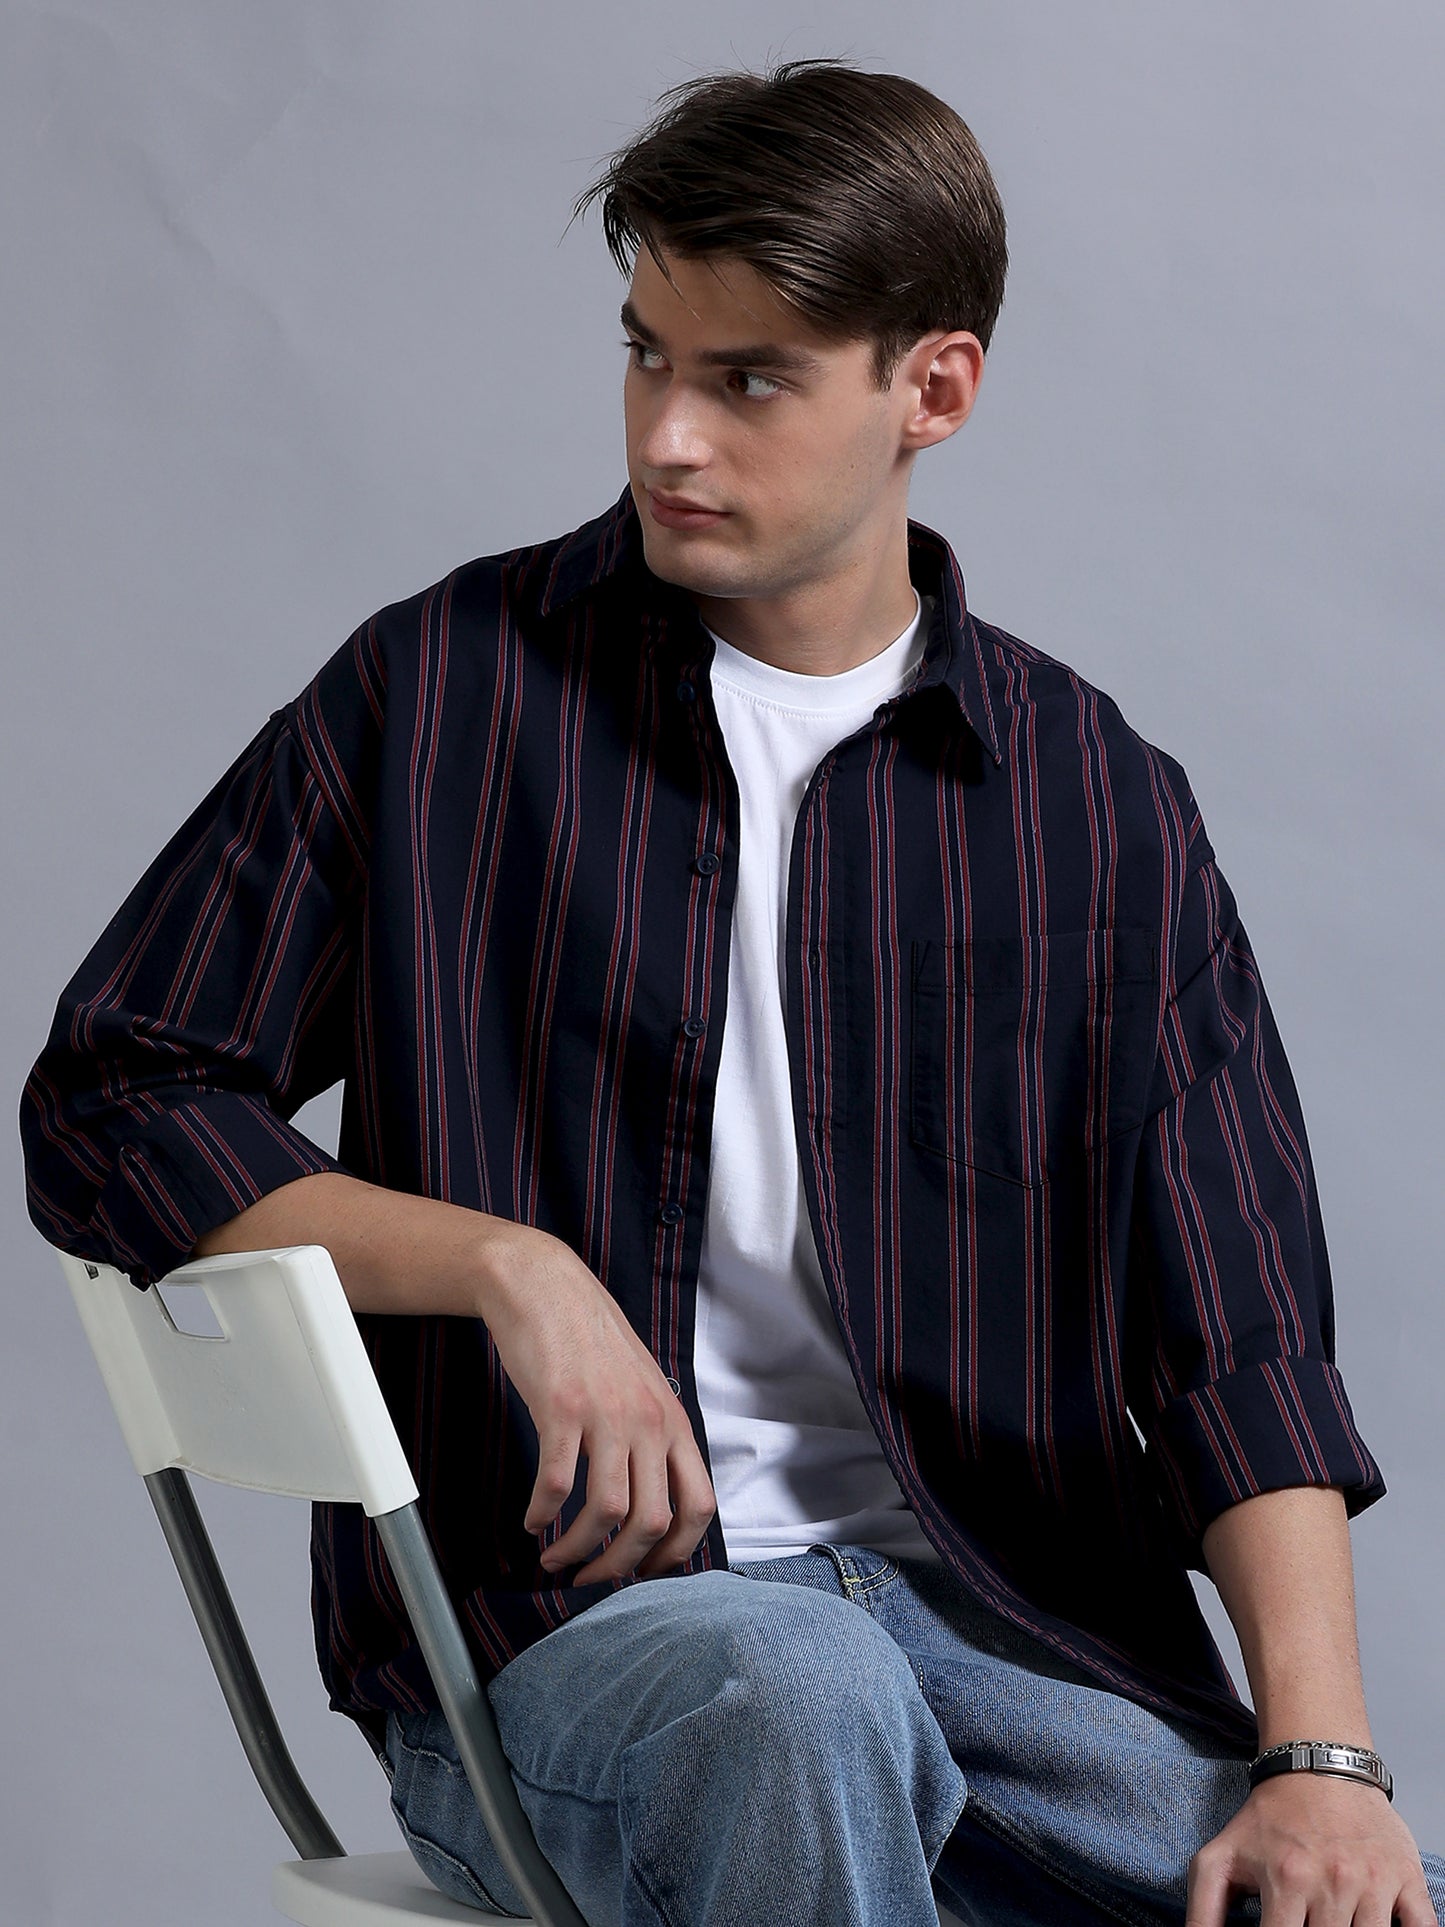 Premium Men Shirt, Relaxed Fit, Yarn Dyed Stripes, Pure Cotton, Full Sleeve, Navy Blue